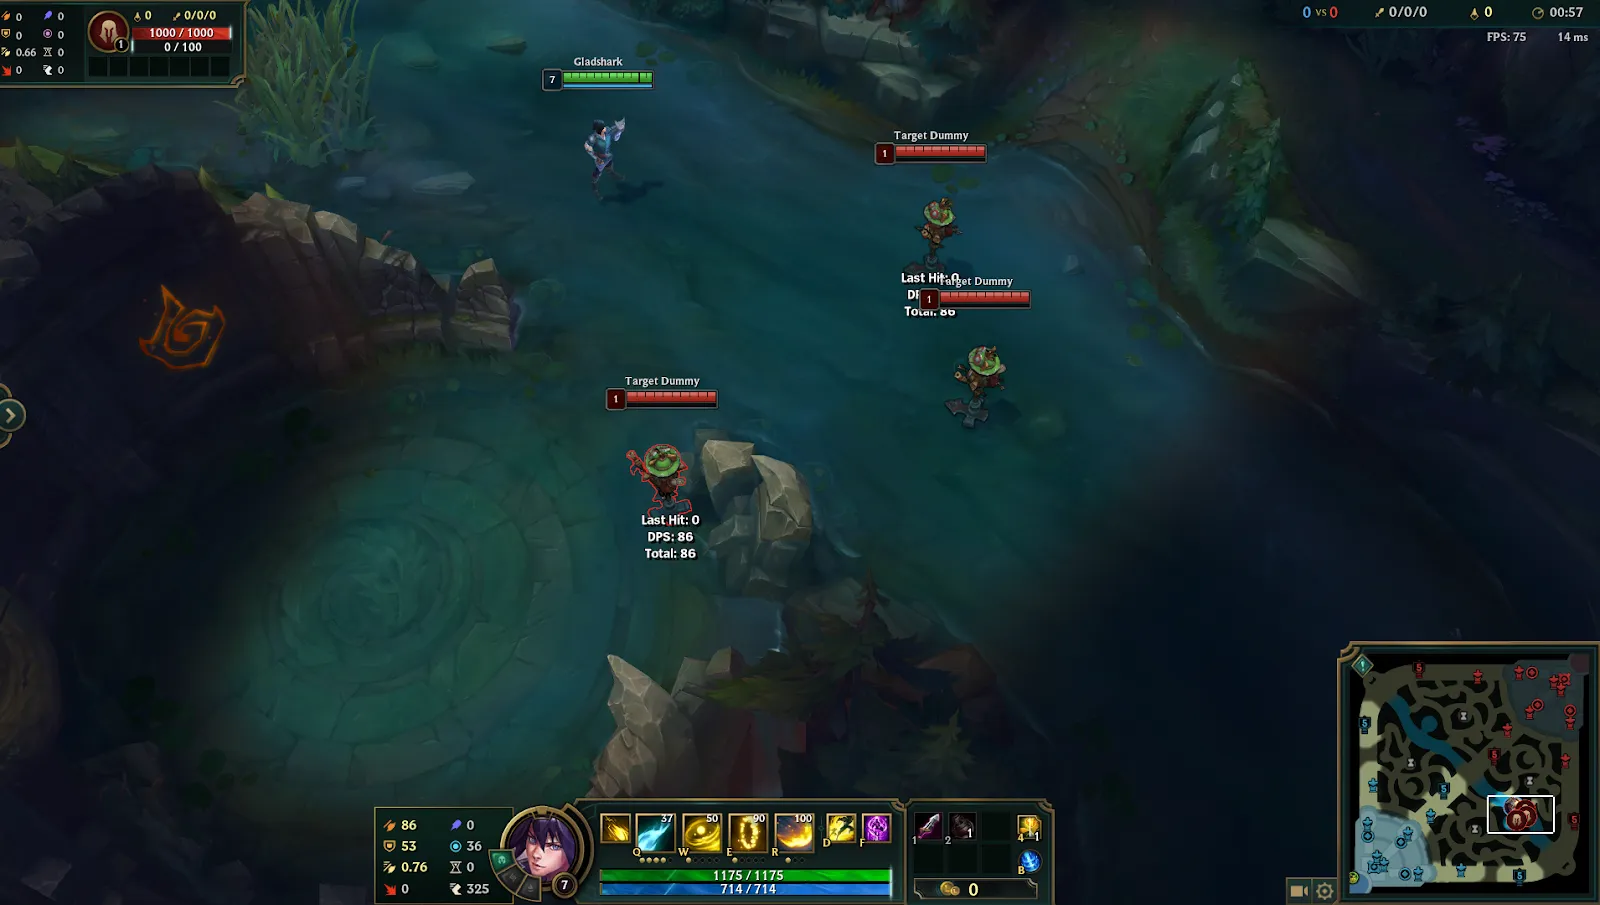 Ezreal in front of three target dummies.